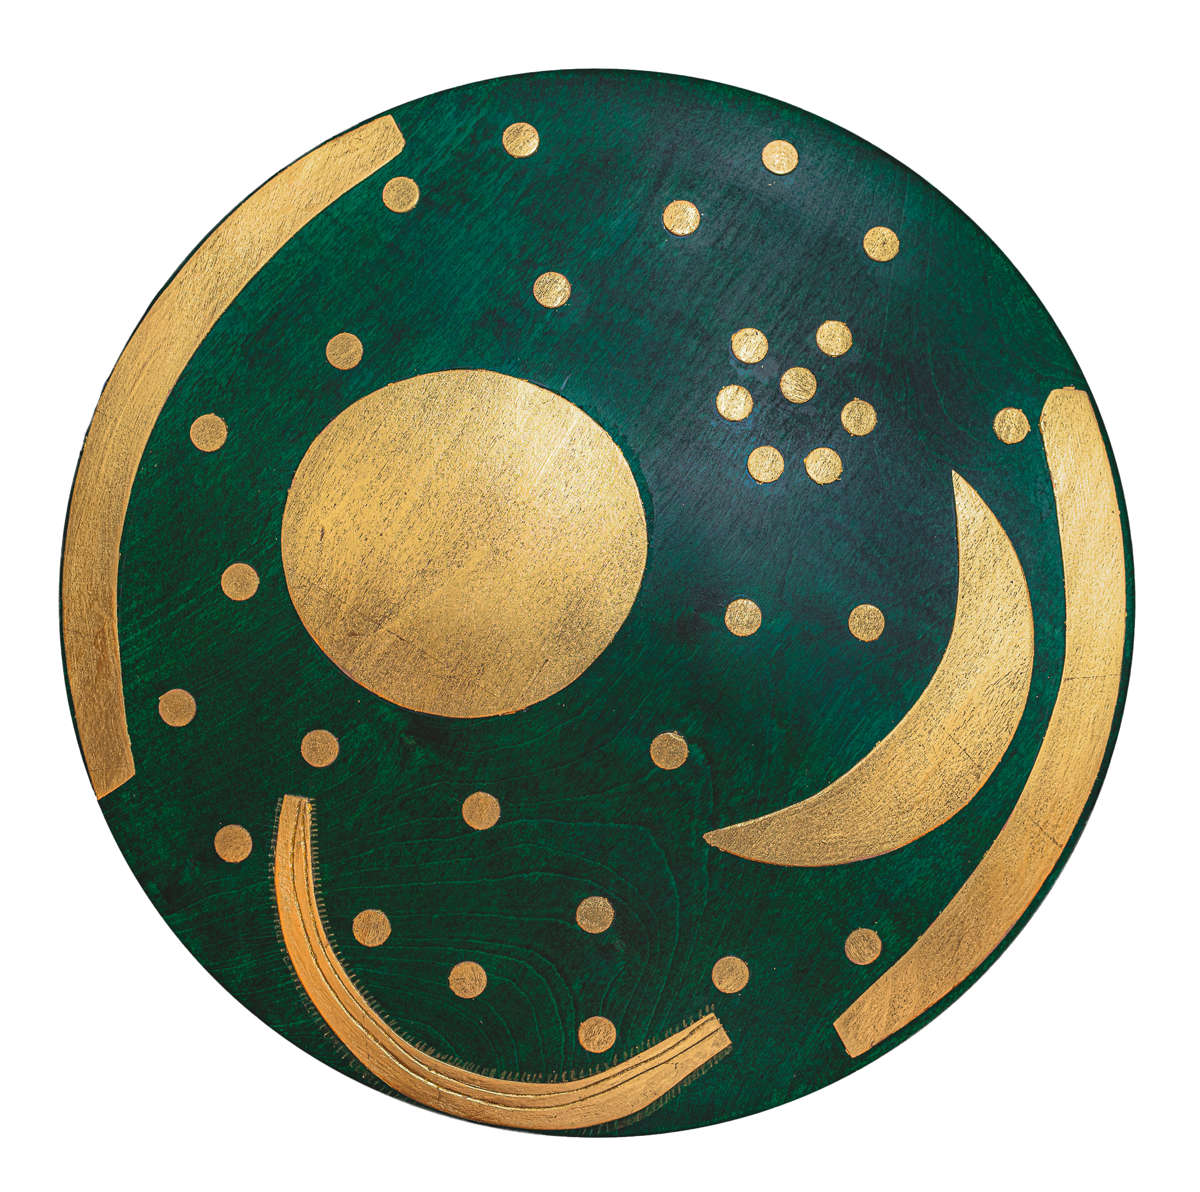 True to original replica of the Sky Disc in wood, decorated with gold leaf (lathe work).